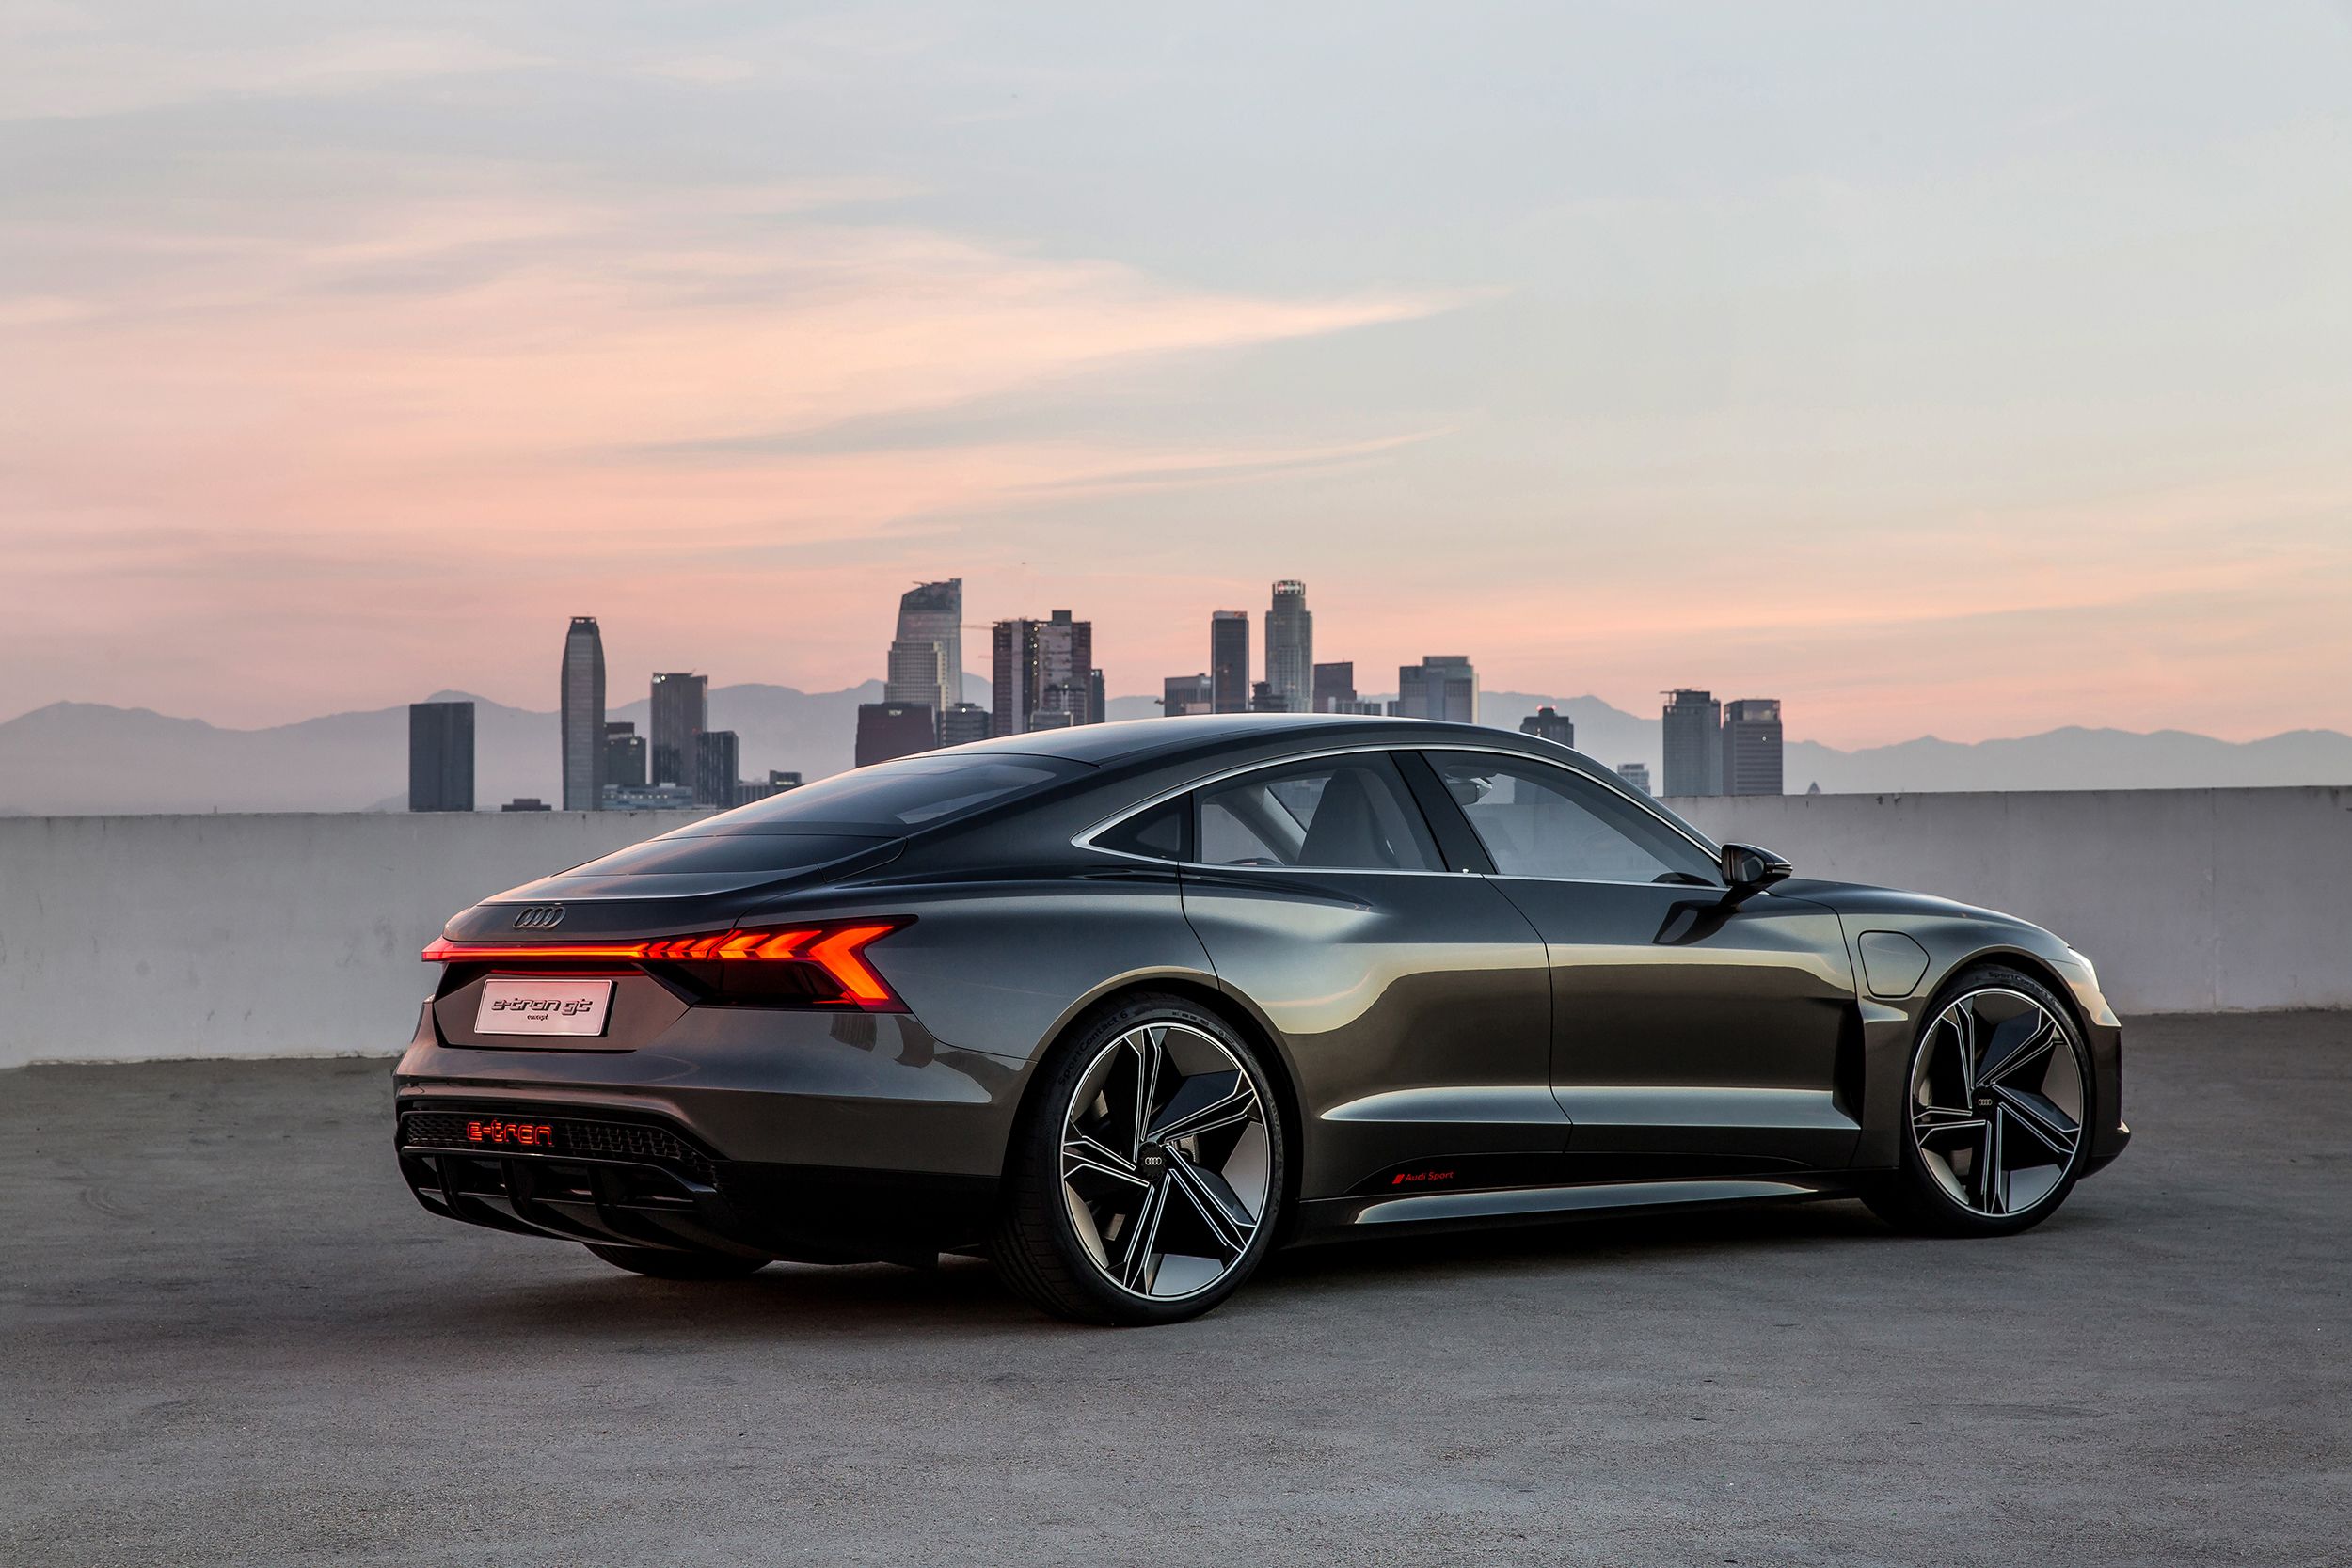 Audi reveals the E-Tron GT, an all-electric sports car